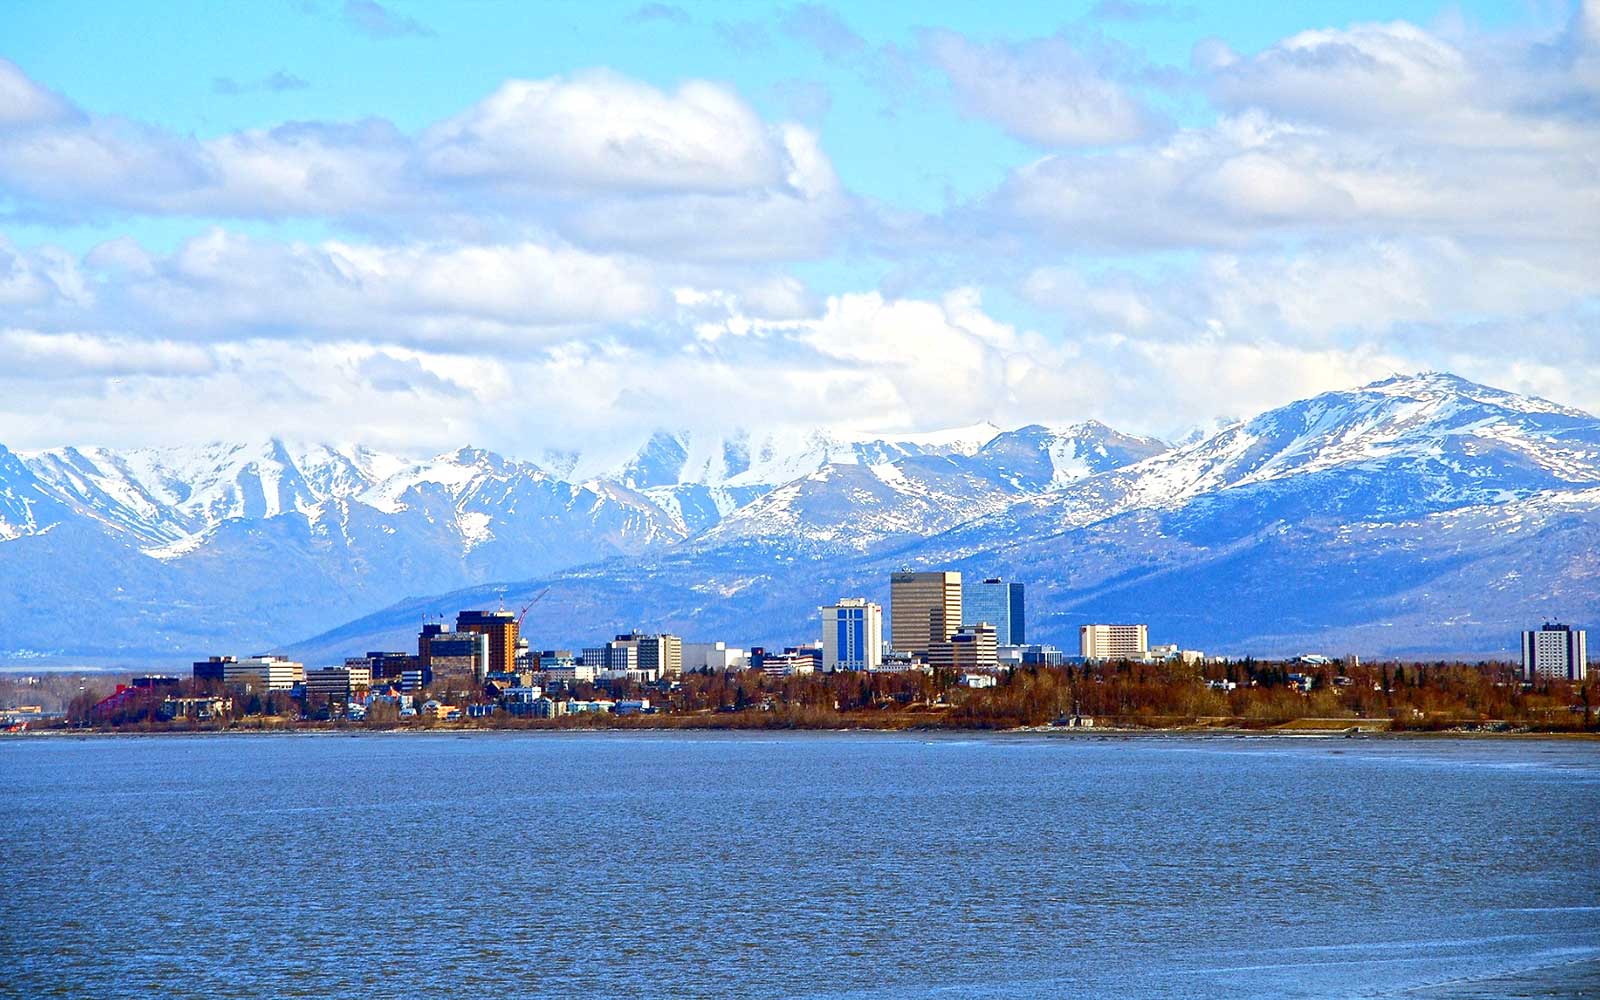 Anchorage Downtown